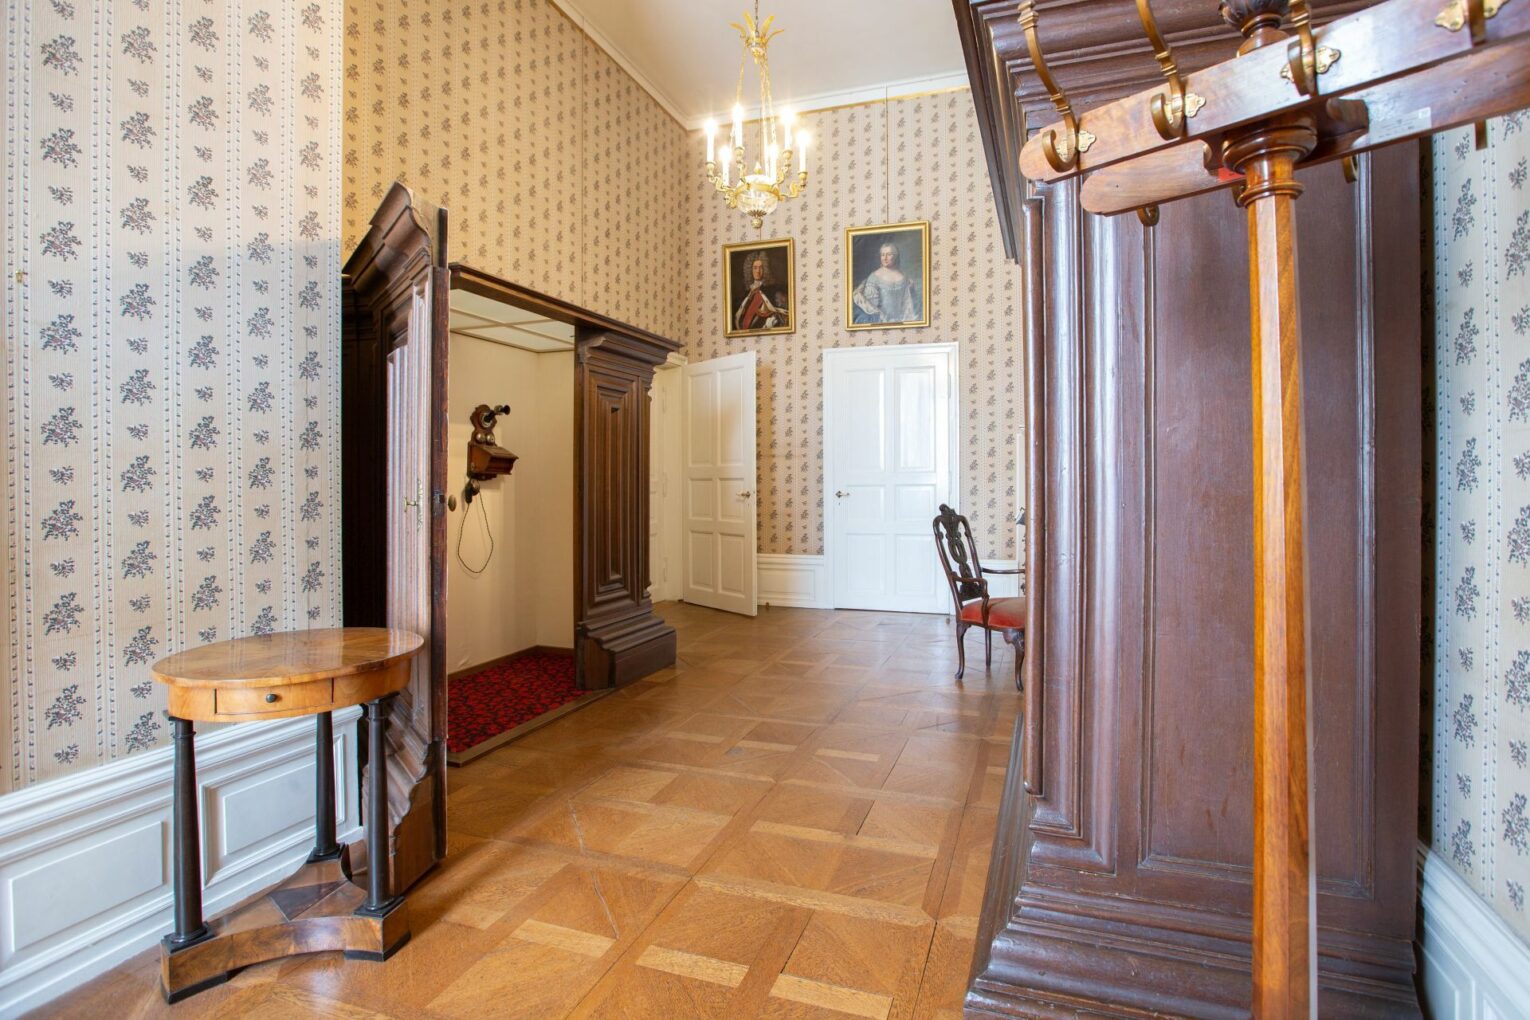 The Telephone Room in the Imperial Rooms